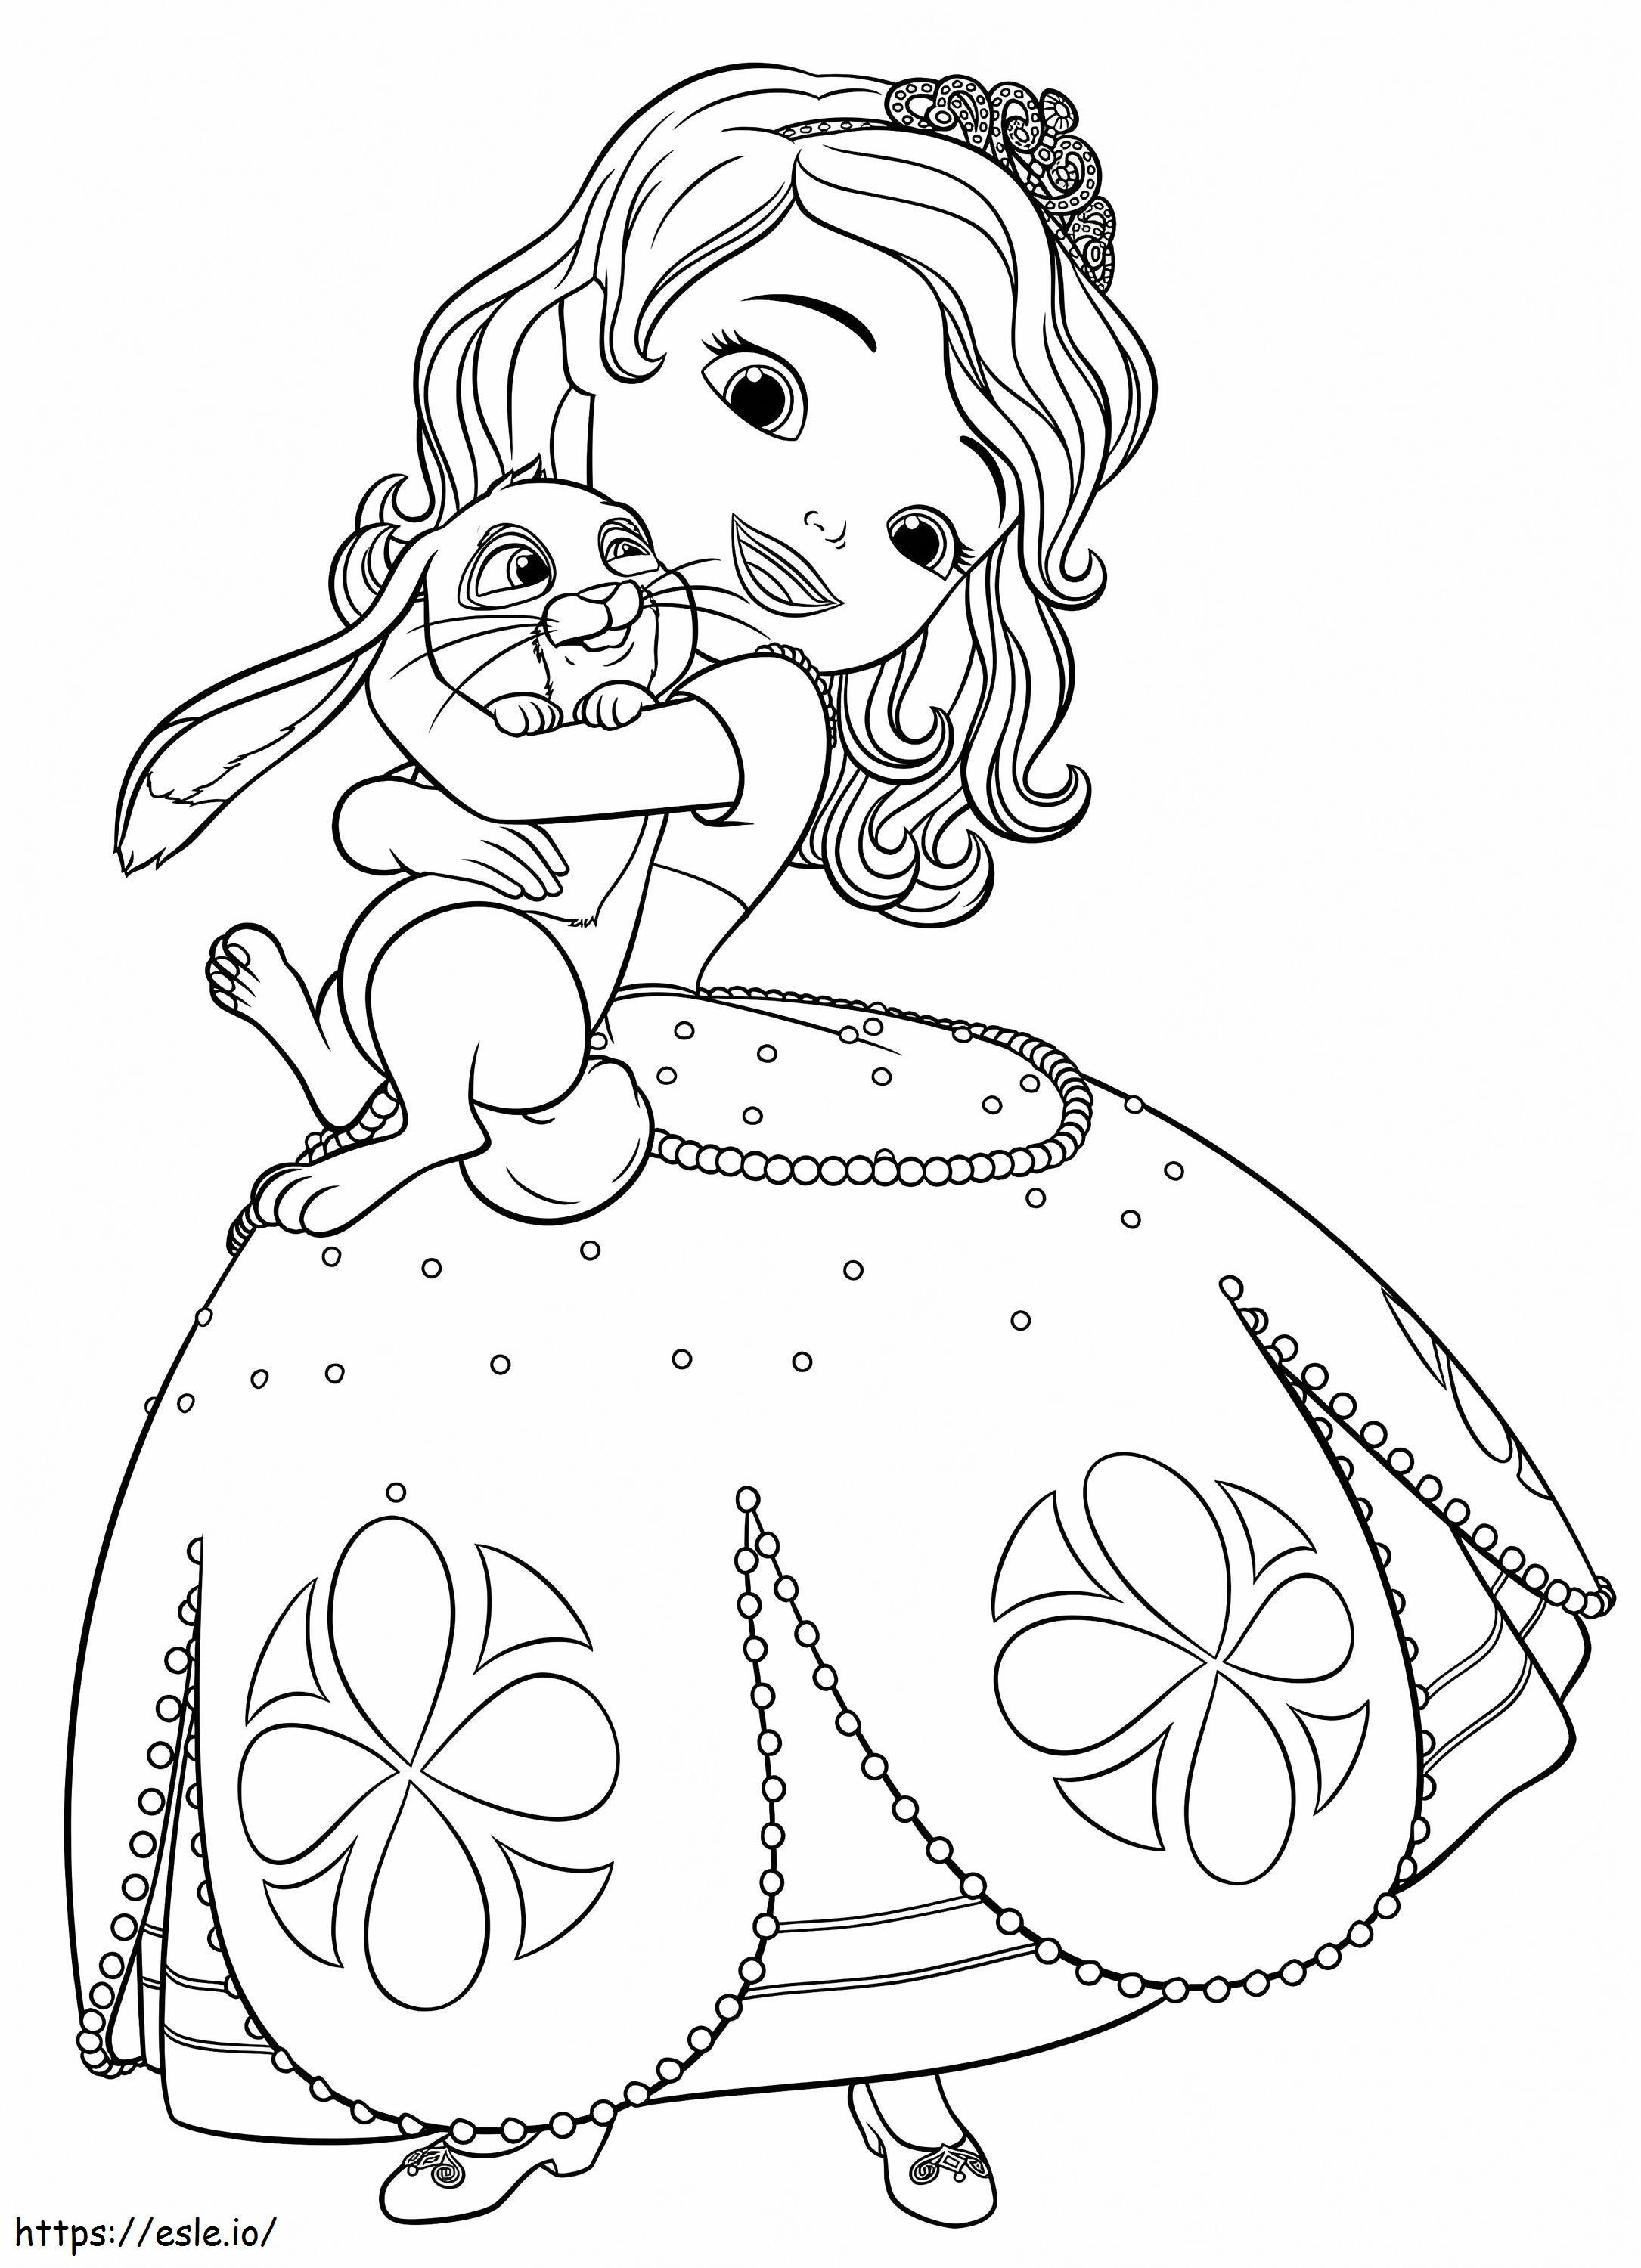 Princess Sofia With Clover coloring page